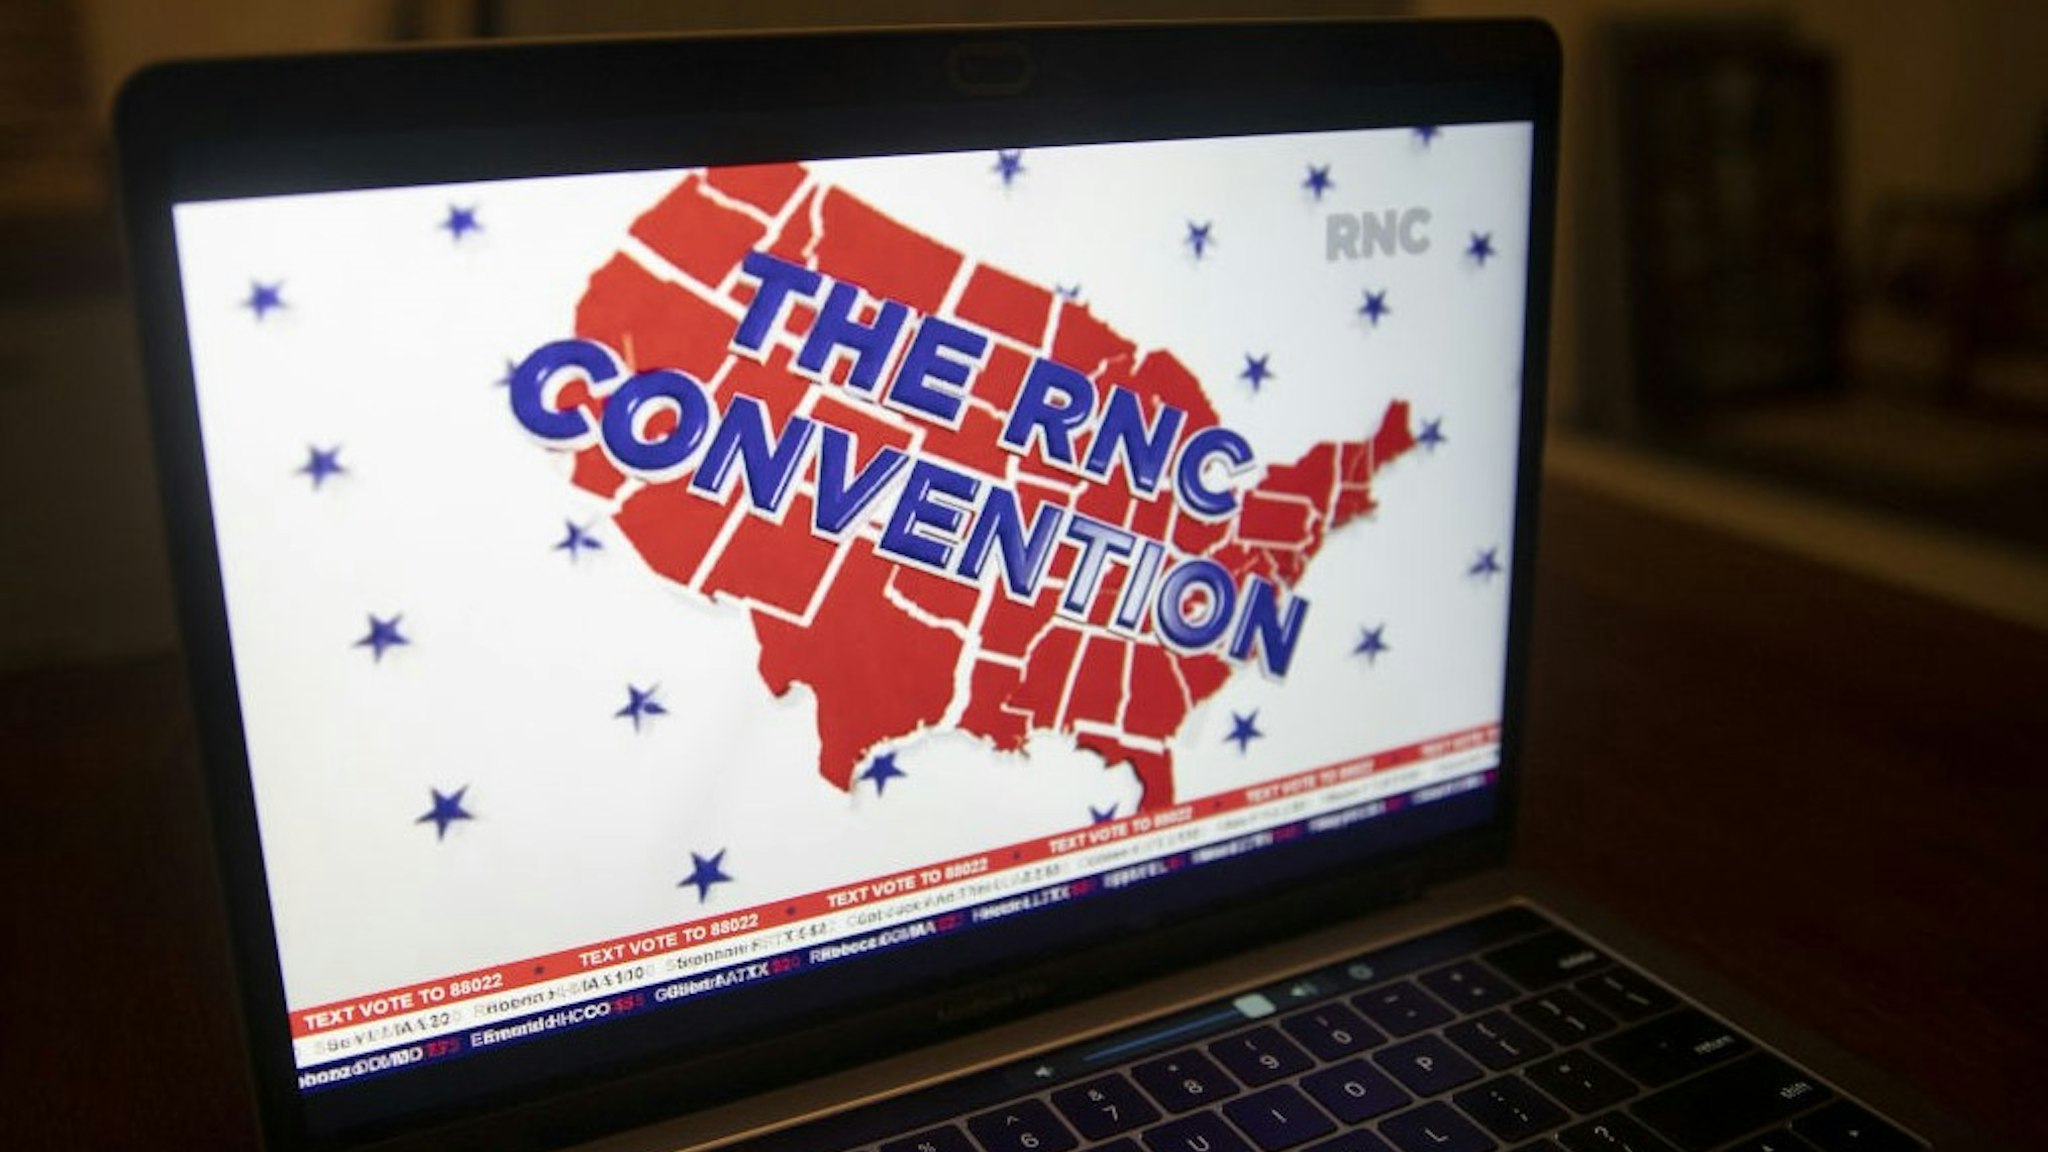 A logo is displayed at the start of the Republican National Convention seen on a laptop computer in Tiskilwa, Illinois, U.S., on Monday, Aug. 24, 2020. President Trump plans to appear nightly during the four-day convention, which after today will be staged mostly from Washington because of the coronavirus pandemic. Photographer: